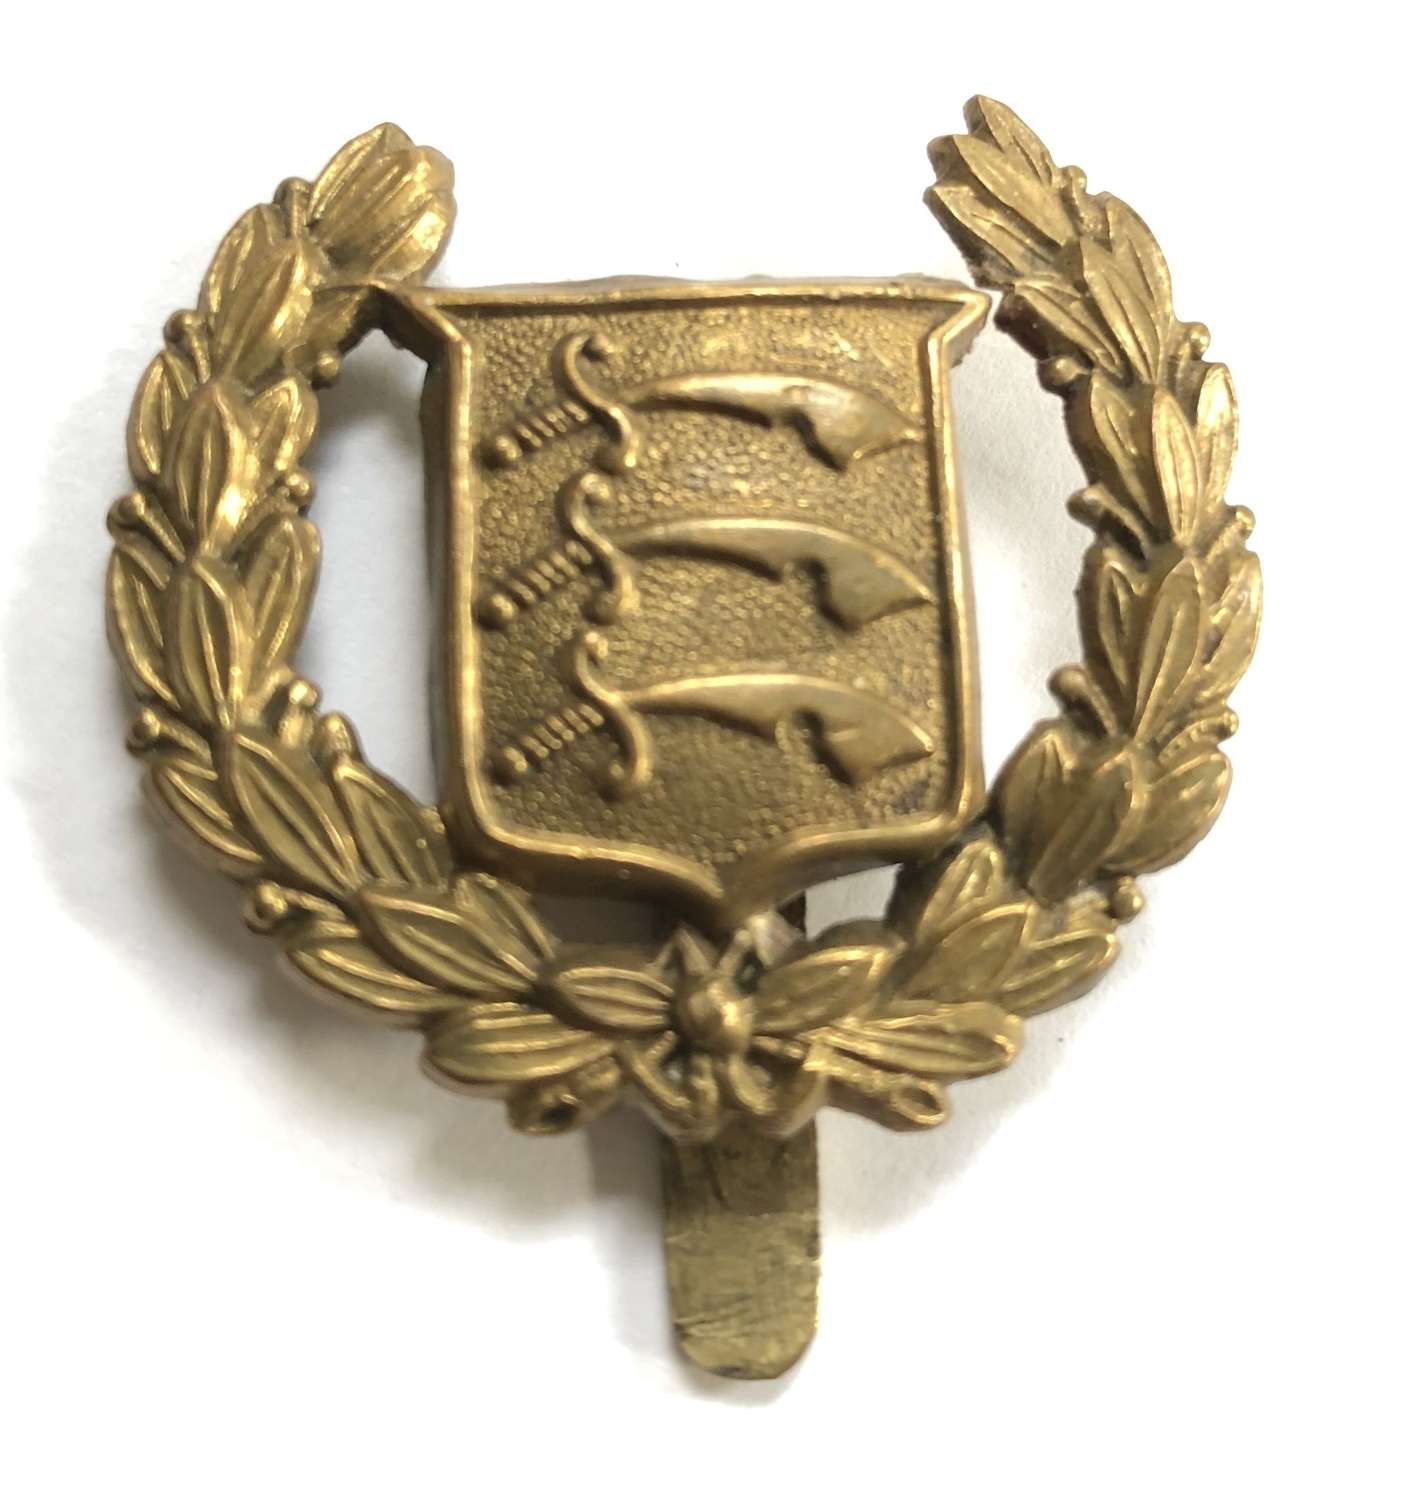 Essex County Cadets scarce brass cap badge